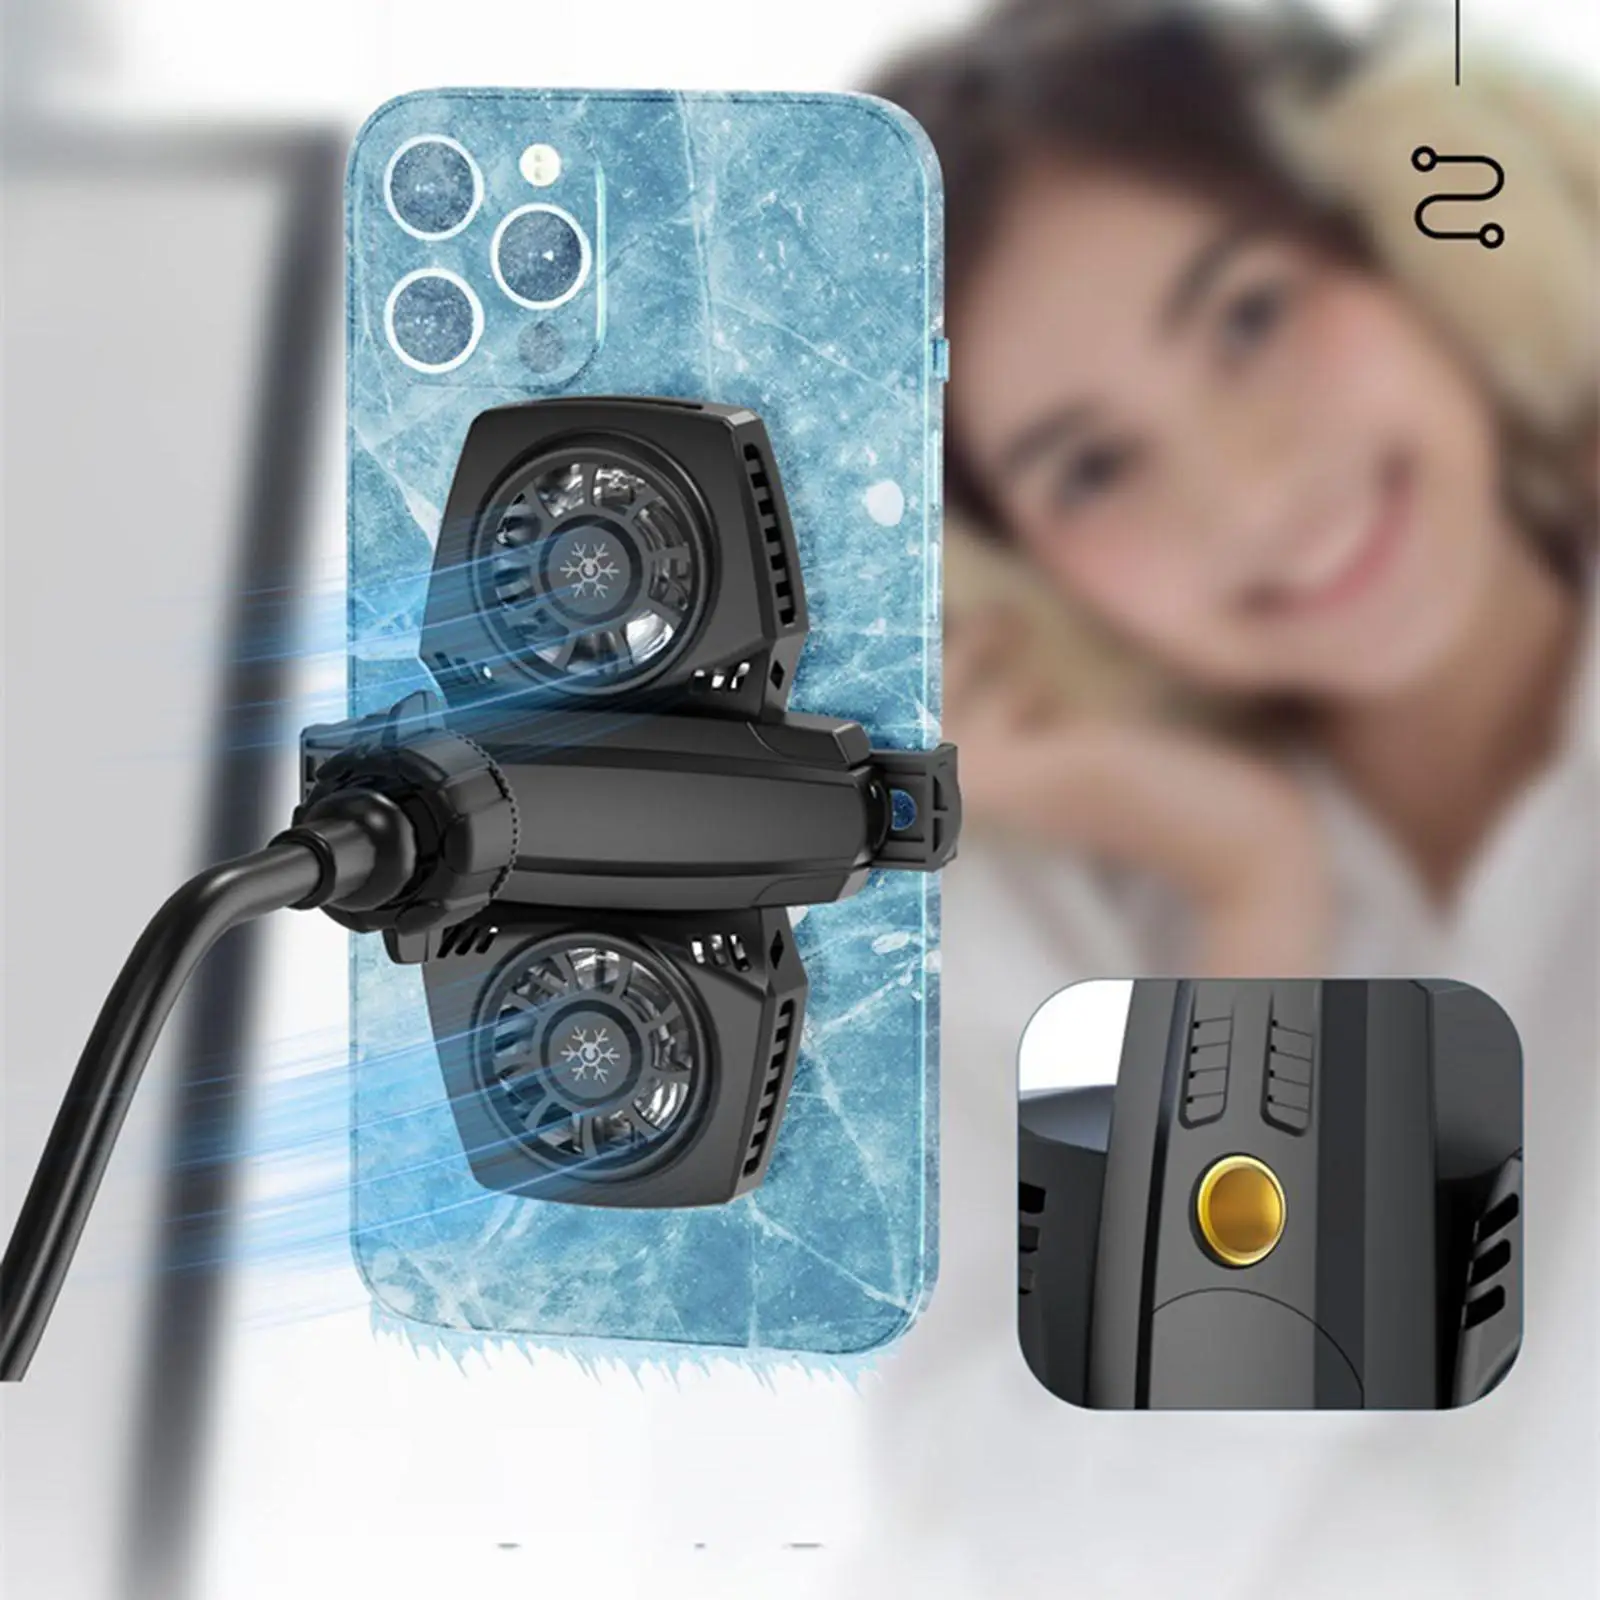 K4 Mobile Phone Radiator Portable with Dual Semi Conductor Dual Cooling Fan Heatsink cooling for Samsung for Live Streaming